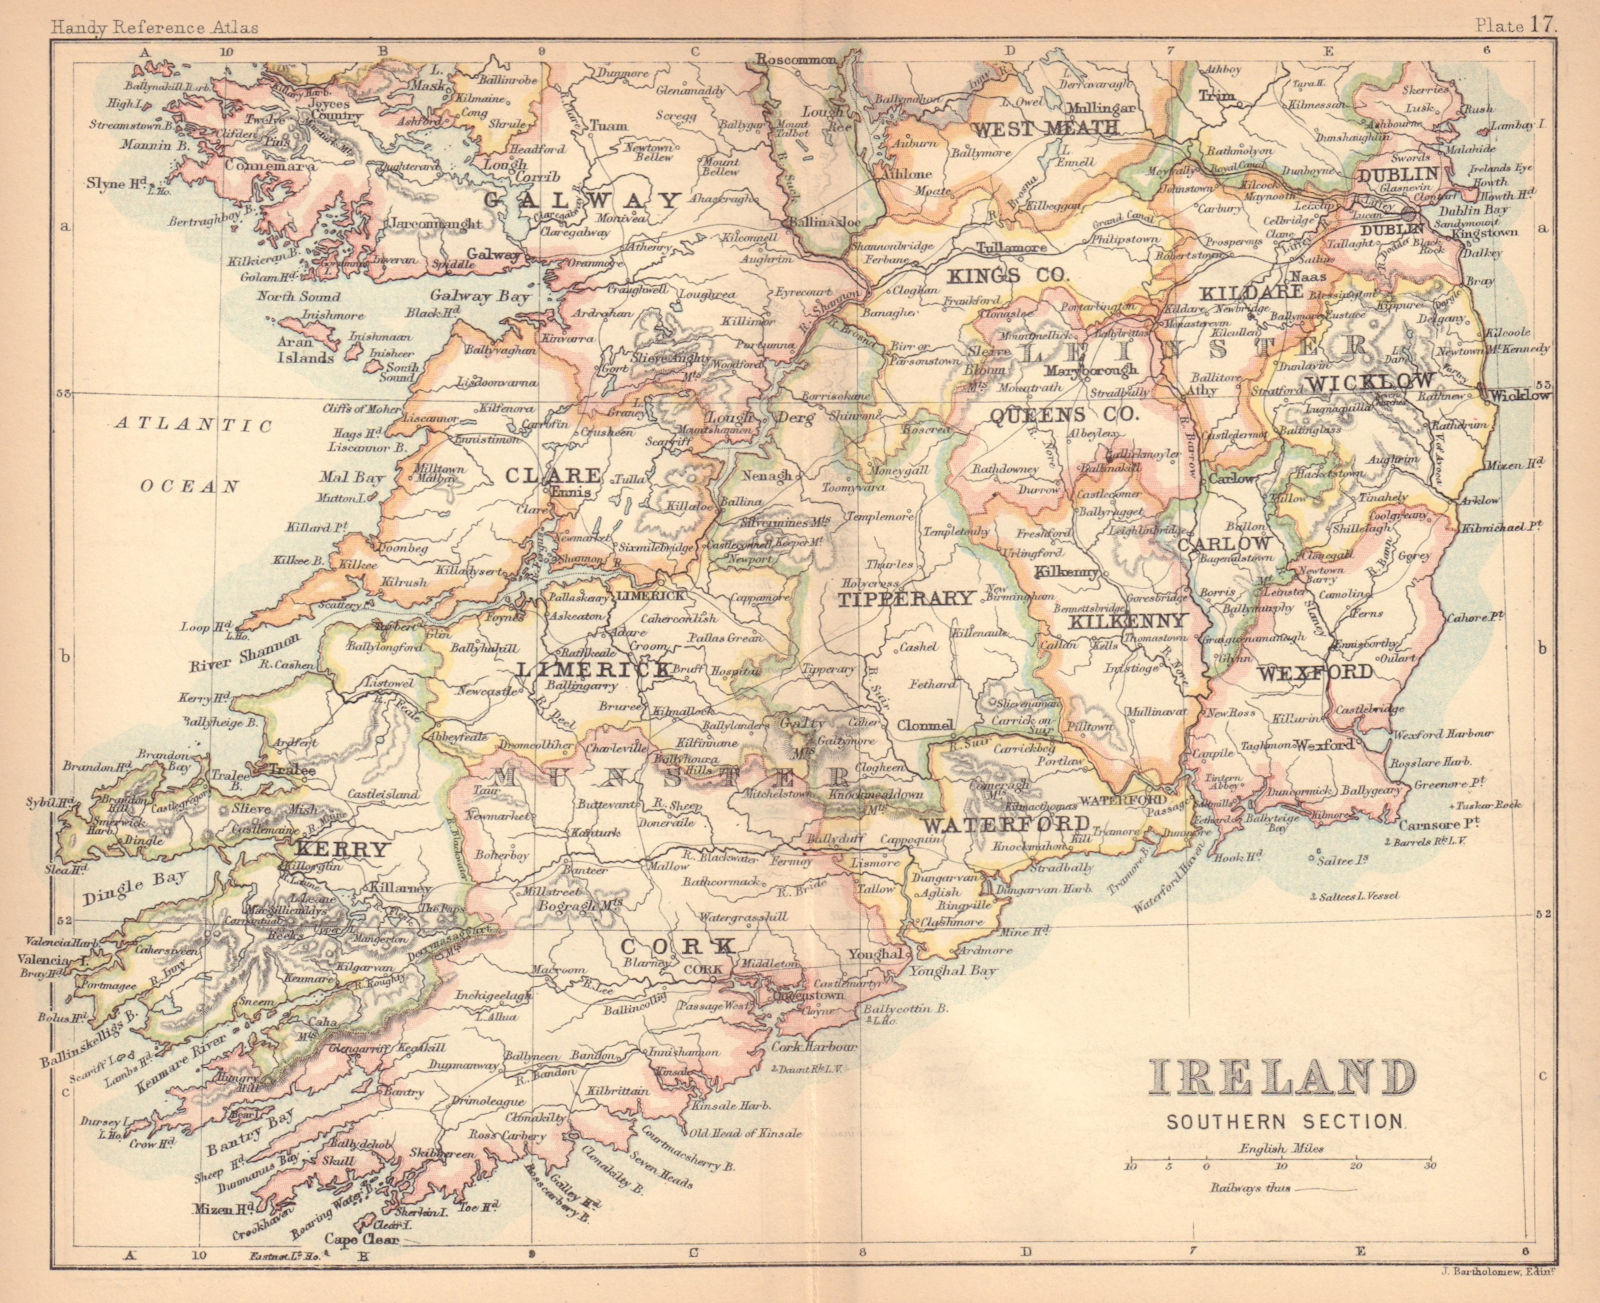 Associate Product Ireland, Southern section. BARTHOLOMEW 1888 old antique vintage map plan chart